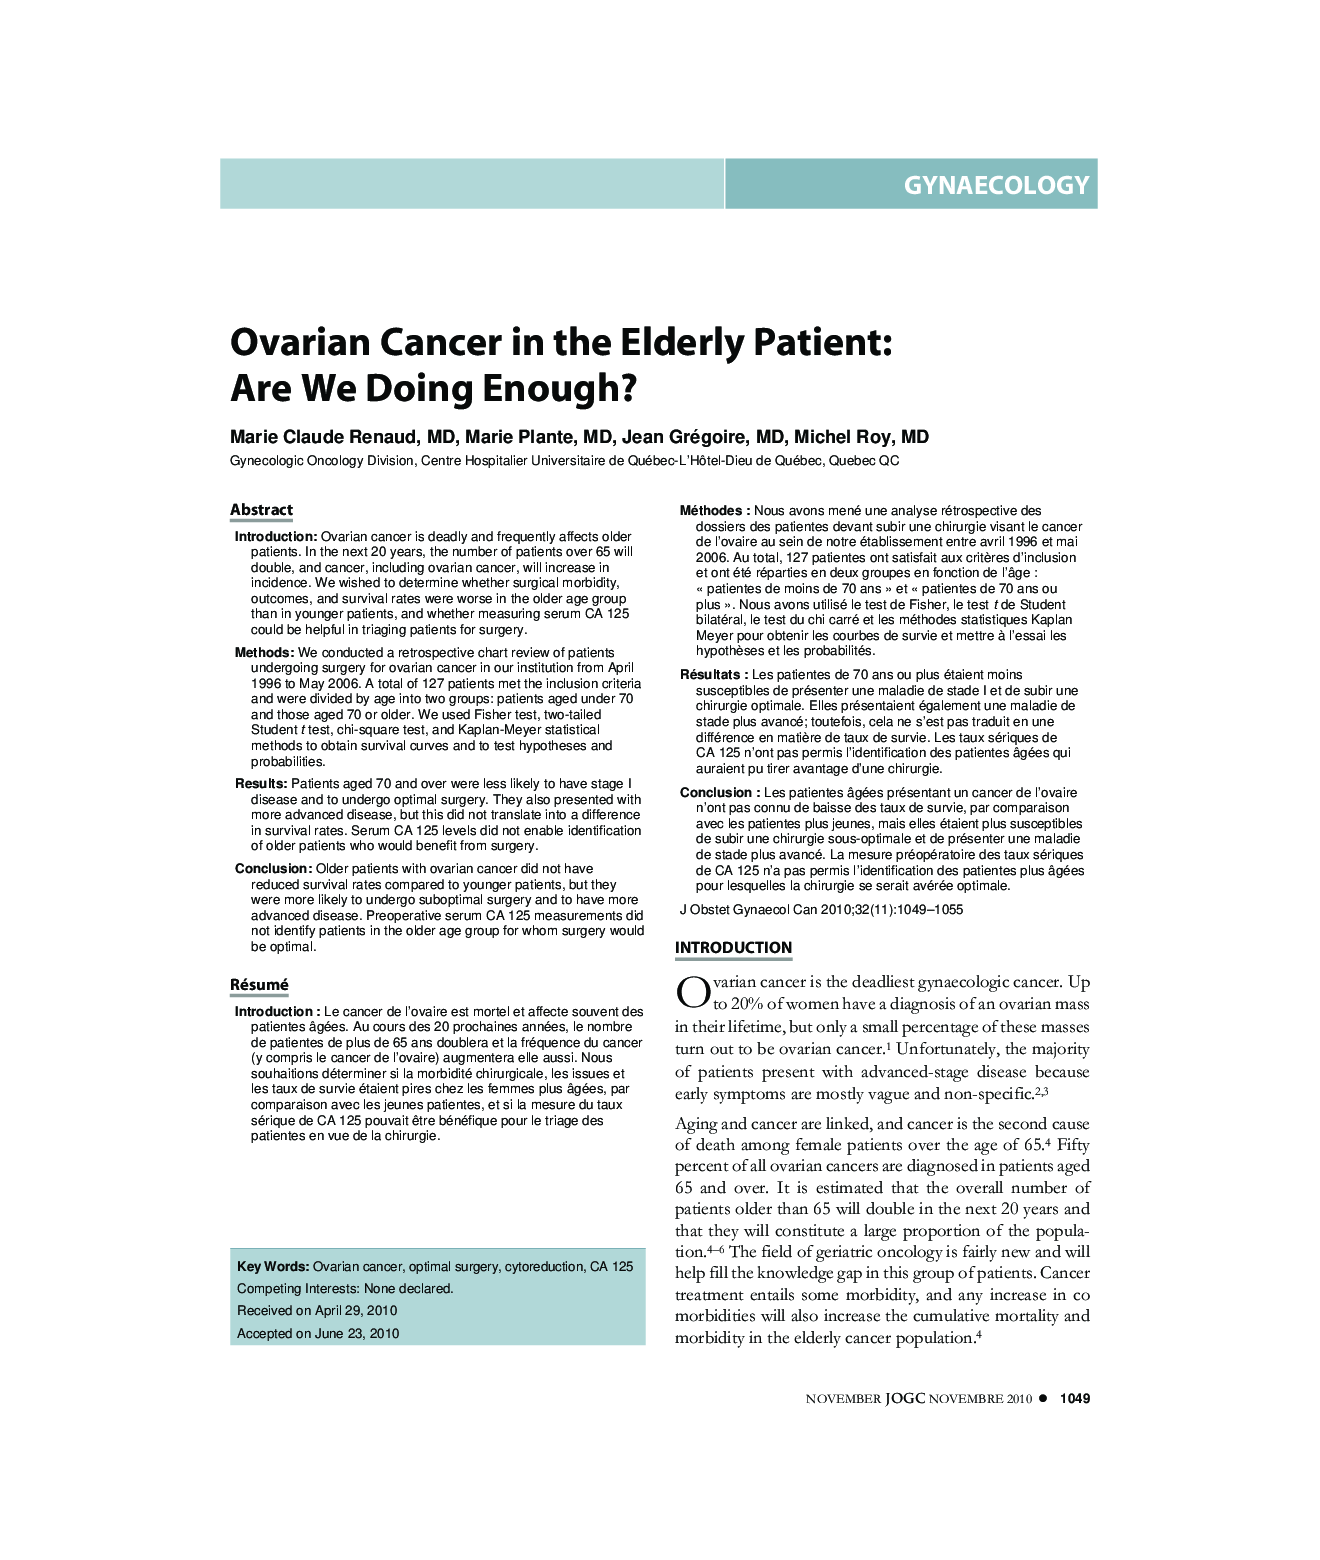 Ovarian Cancer in the Elderly Patient: Are We Doing Enough?